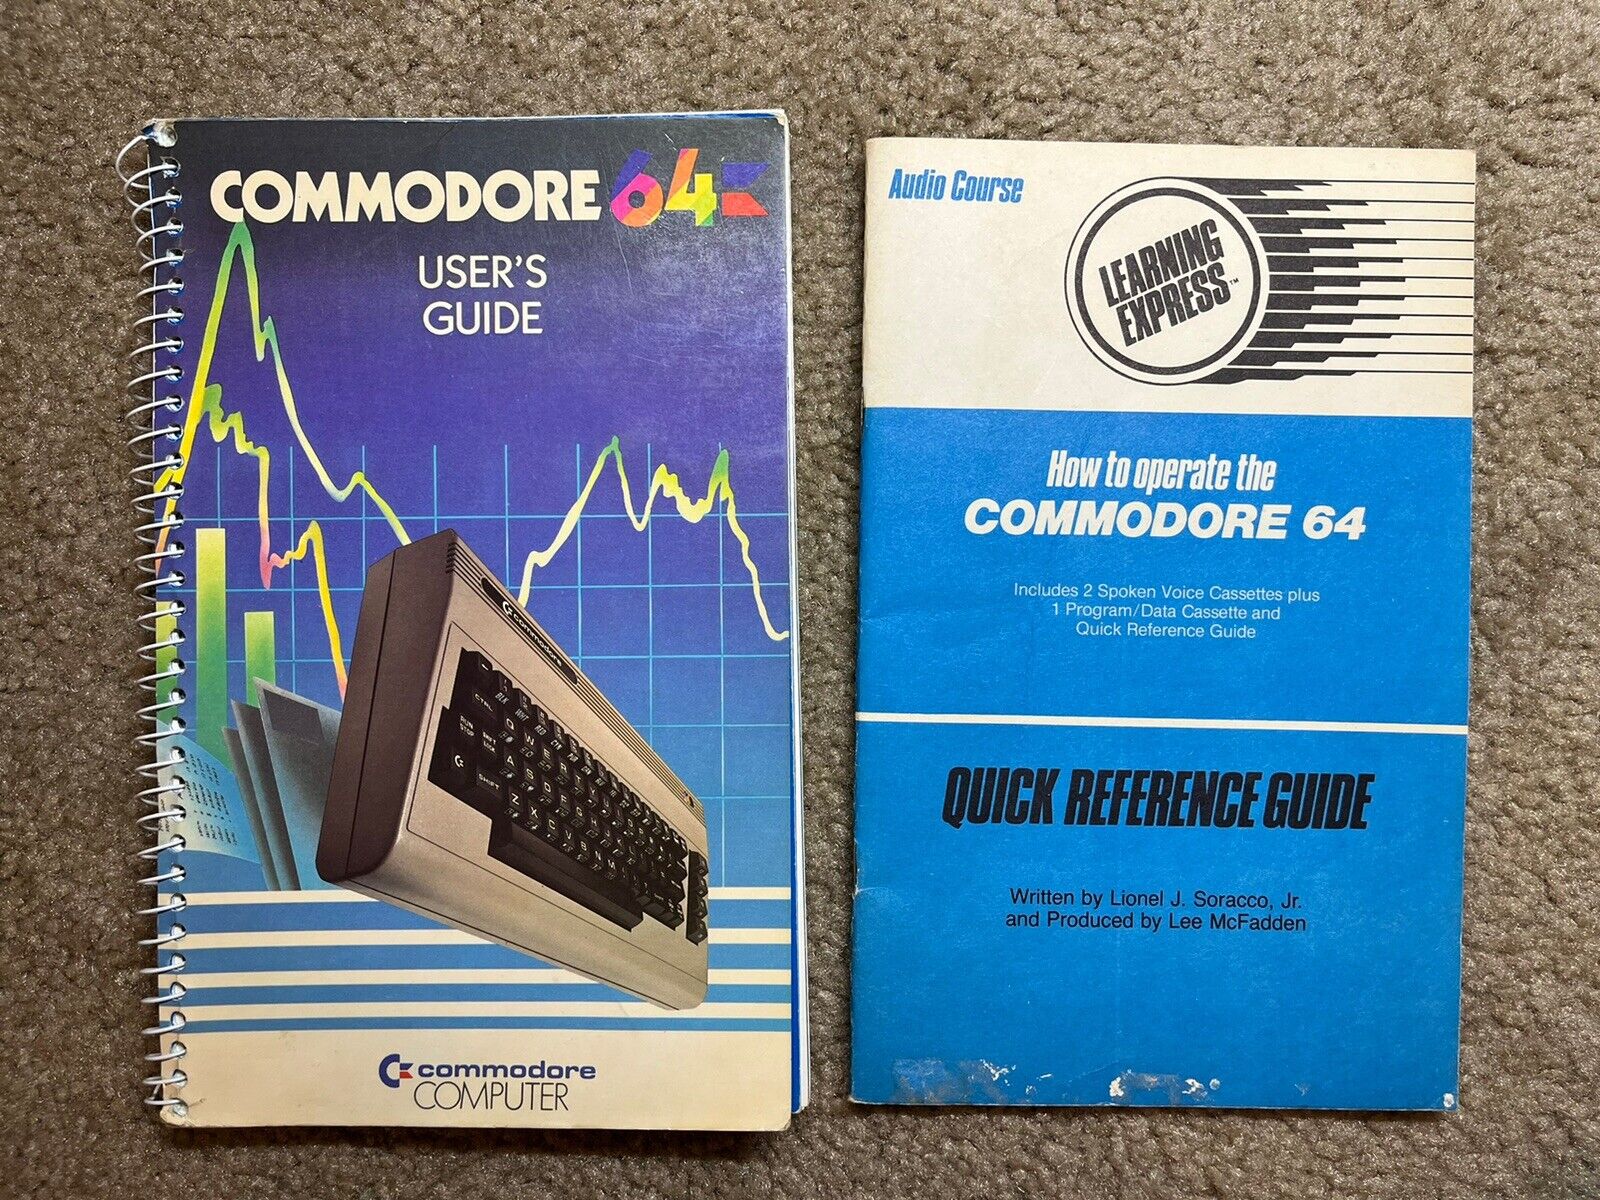 Commodore 64 User's Guide Book (1st Edition - 5th Printing, 1983)